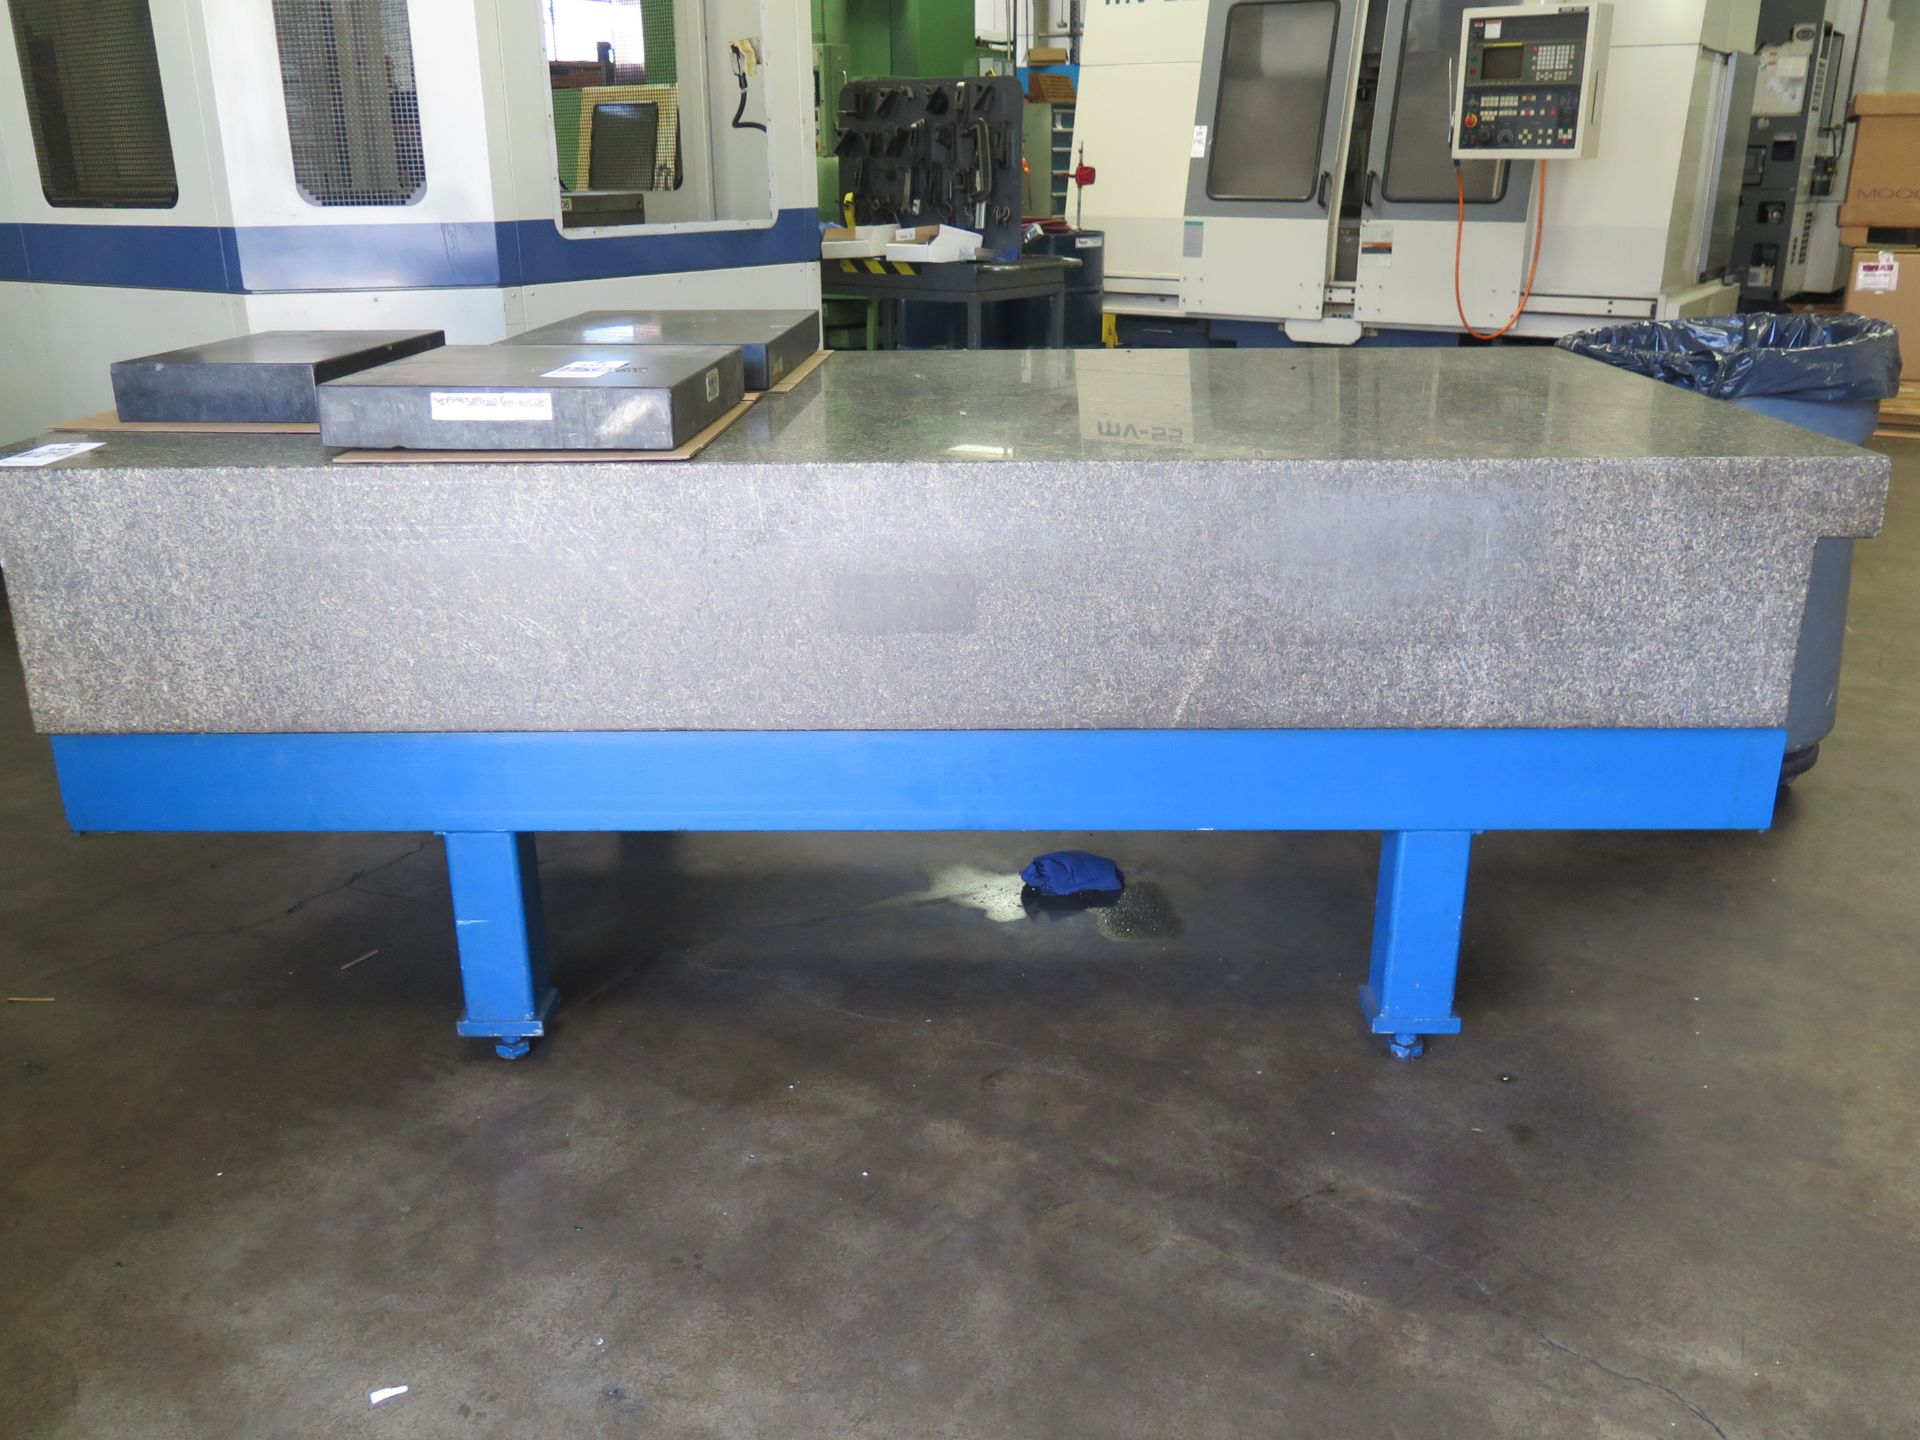 48" X 96" X 14" 2-LEDGE GRANITE SURFACE PLATE W/ STAND